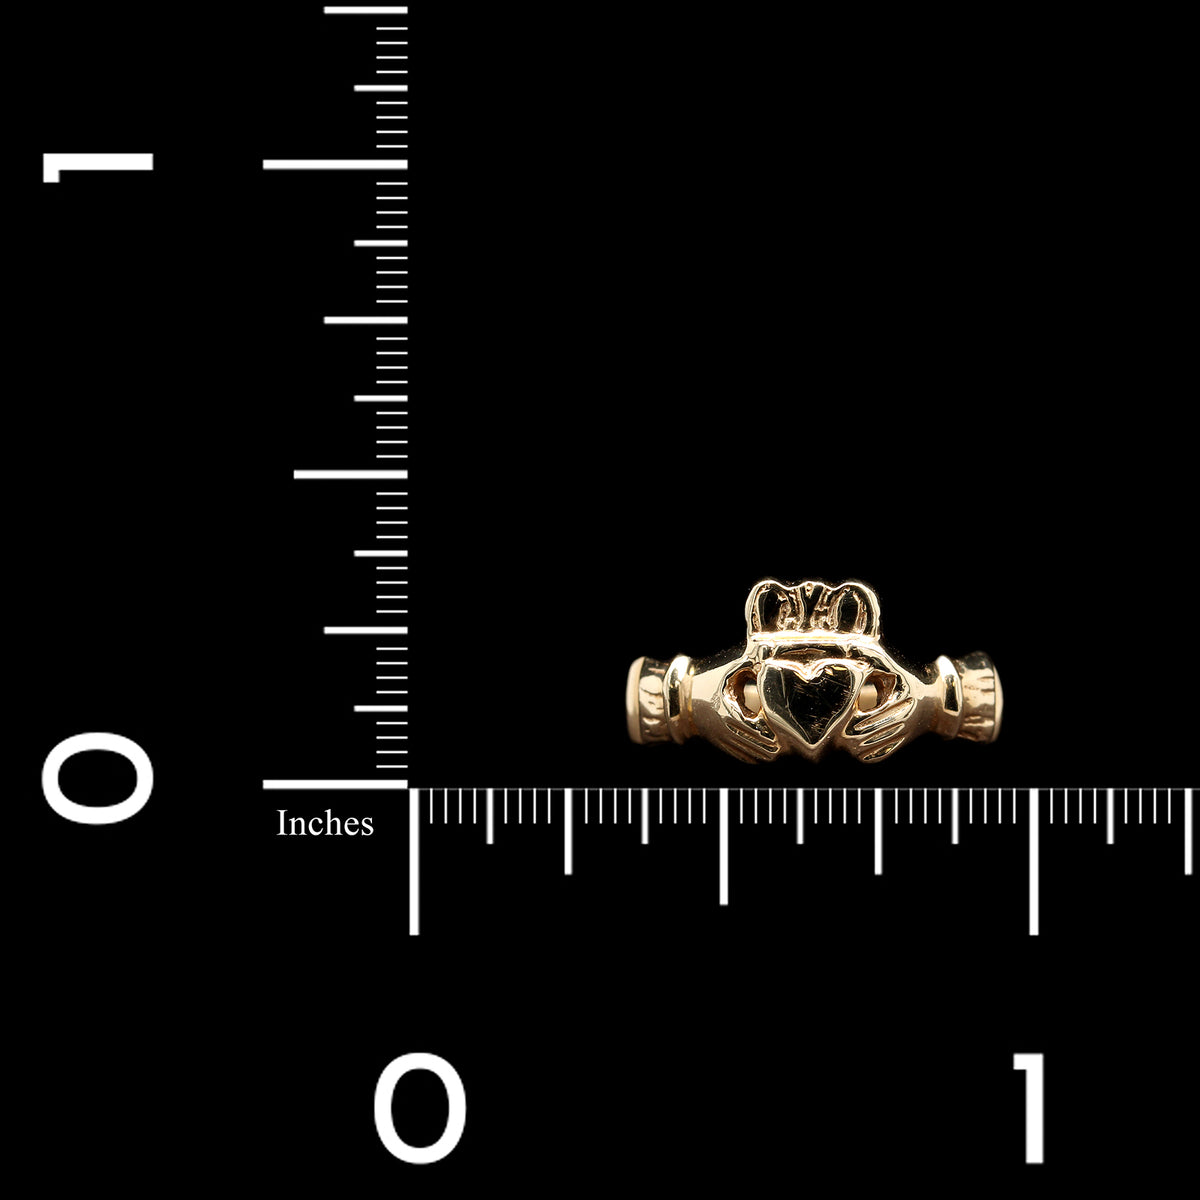 14K Yellow Gold Estate Claddagh Ring